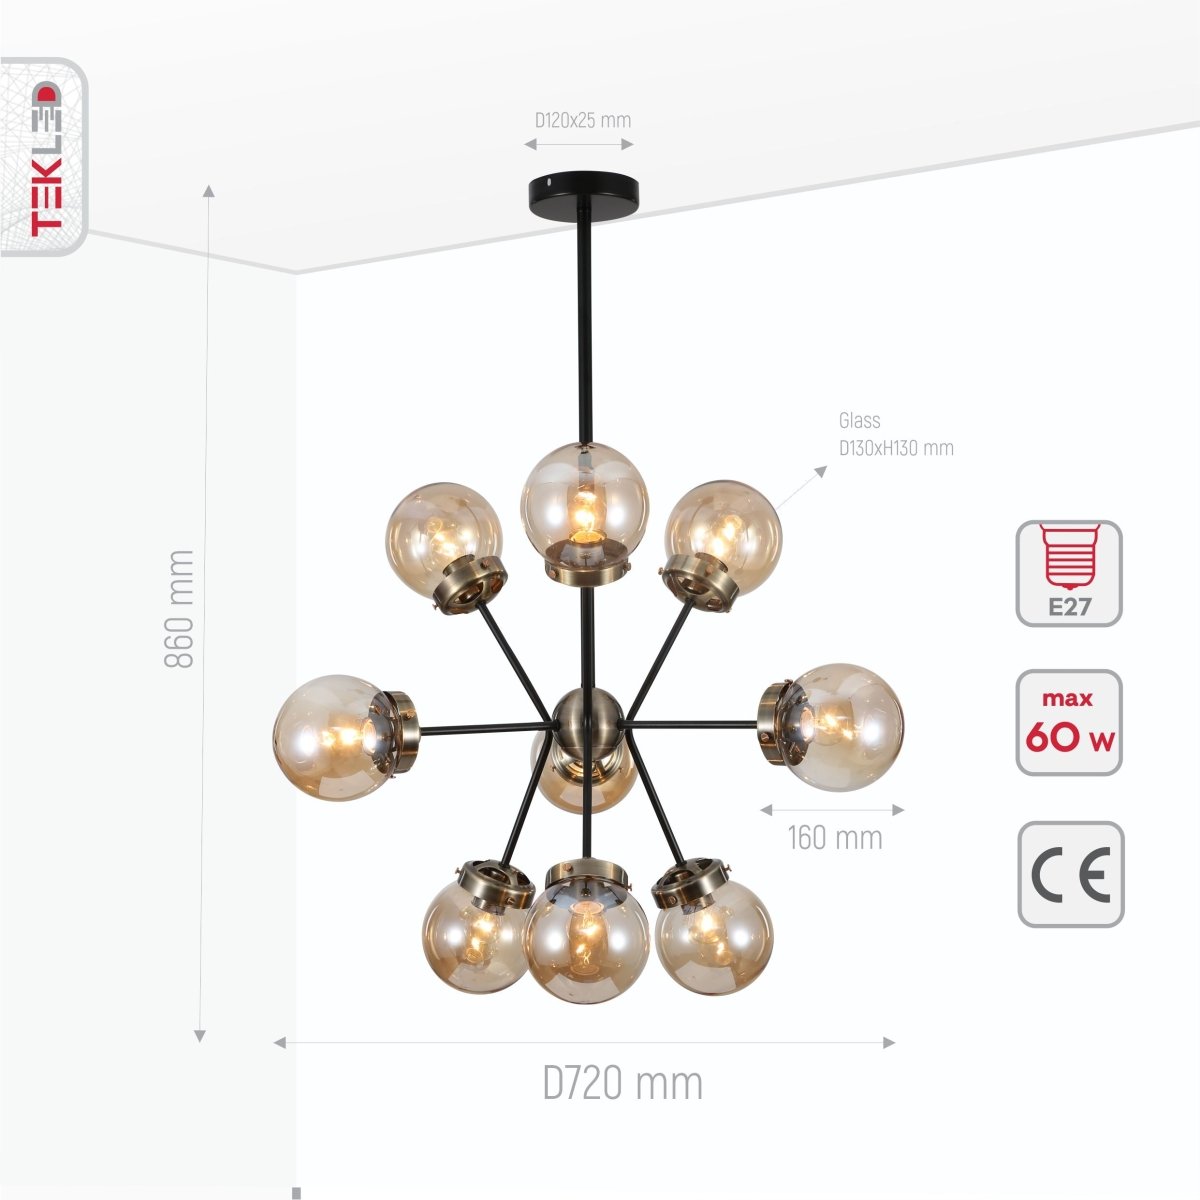 Product dimensions of amber glass globe black and antique brass semi flush ceiling light 9xe27